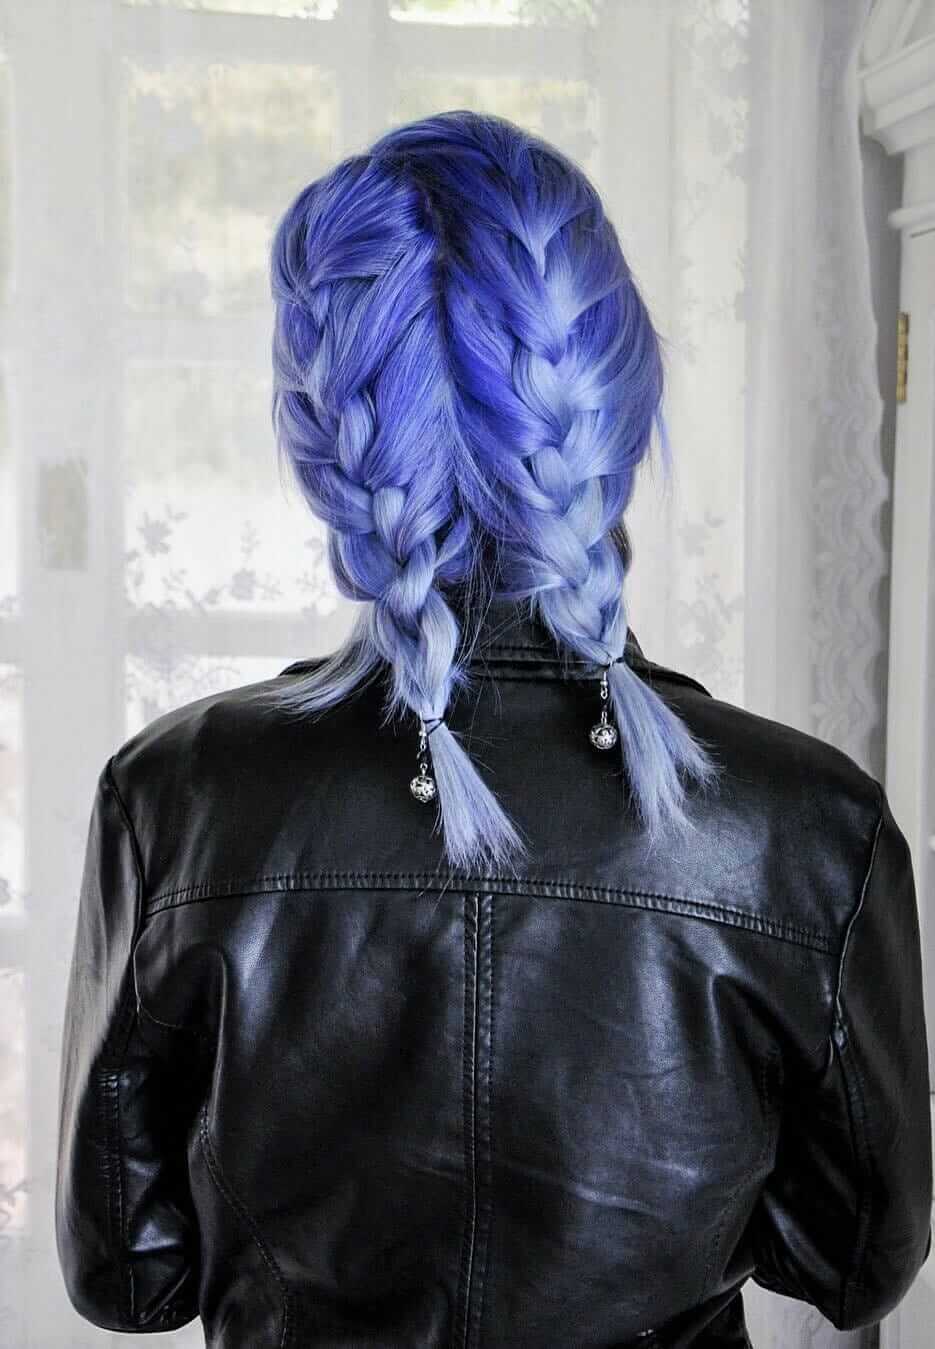 Double Dutch blue braided hair with Crazy Color lilac hair dye by jessica_dueck